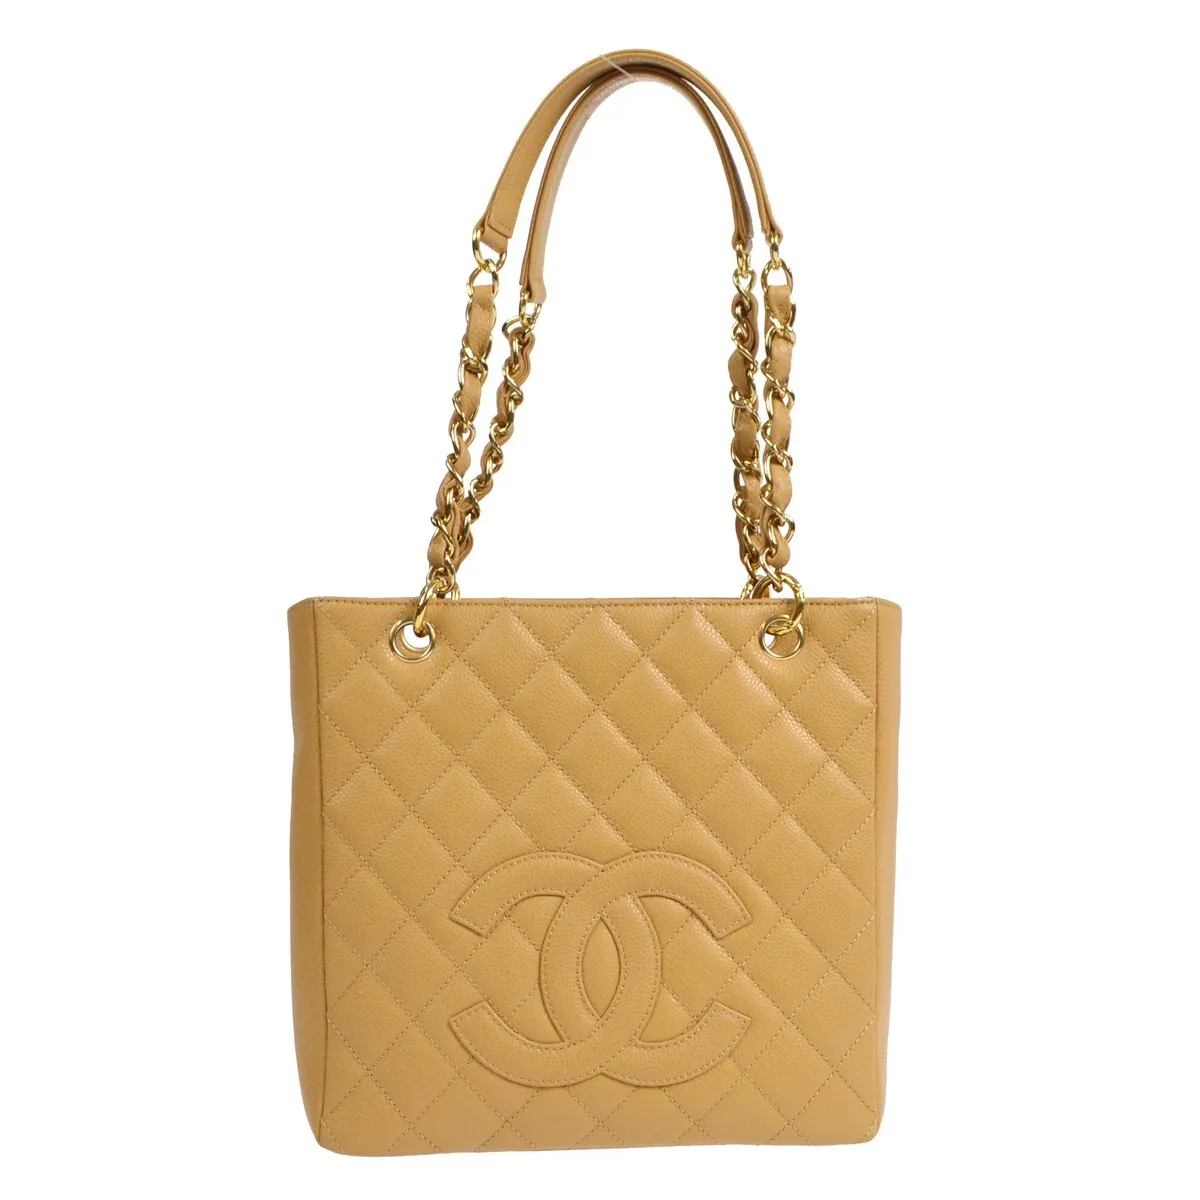 CHANEL Petite Shopping Tote PST Chain Hand Tote Bag Beige Caviar